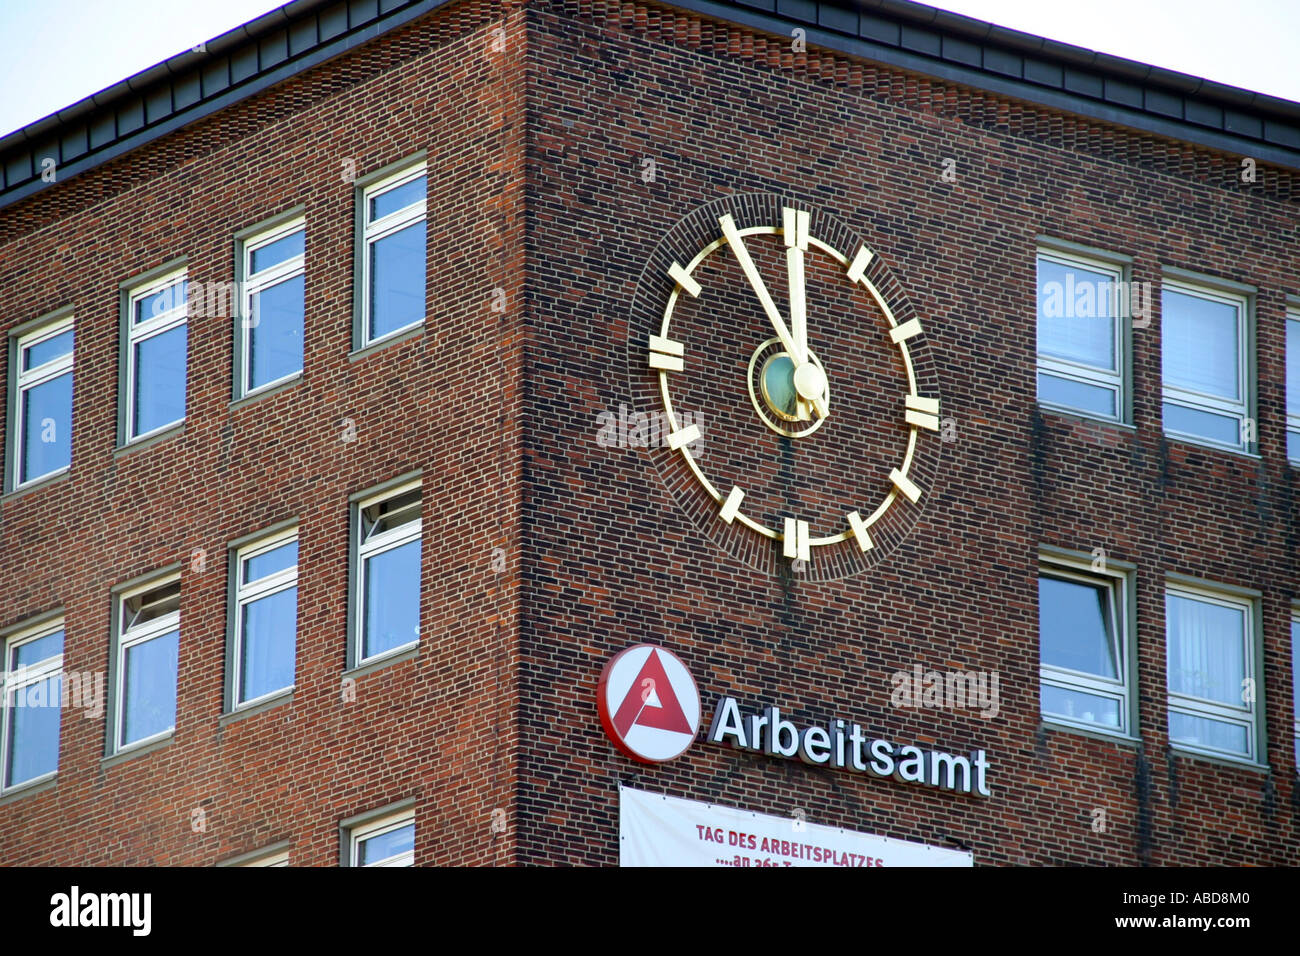 Labour office with clock 5 minutes before 12 Stock Photo